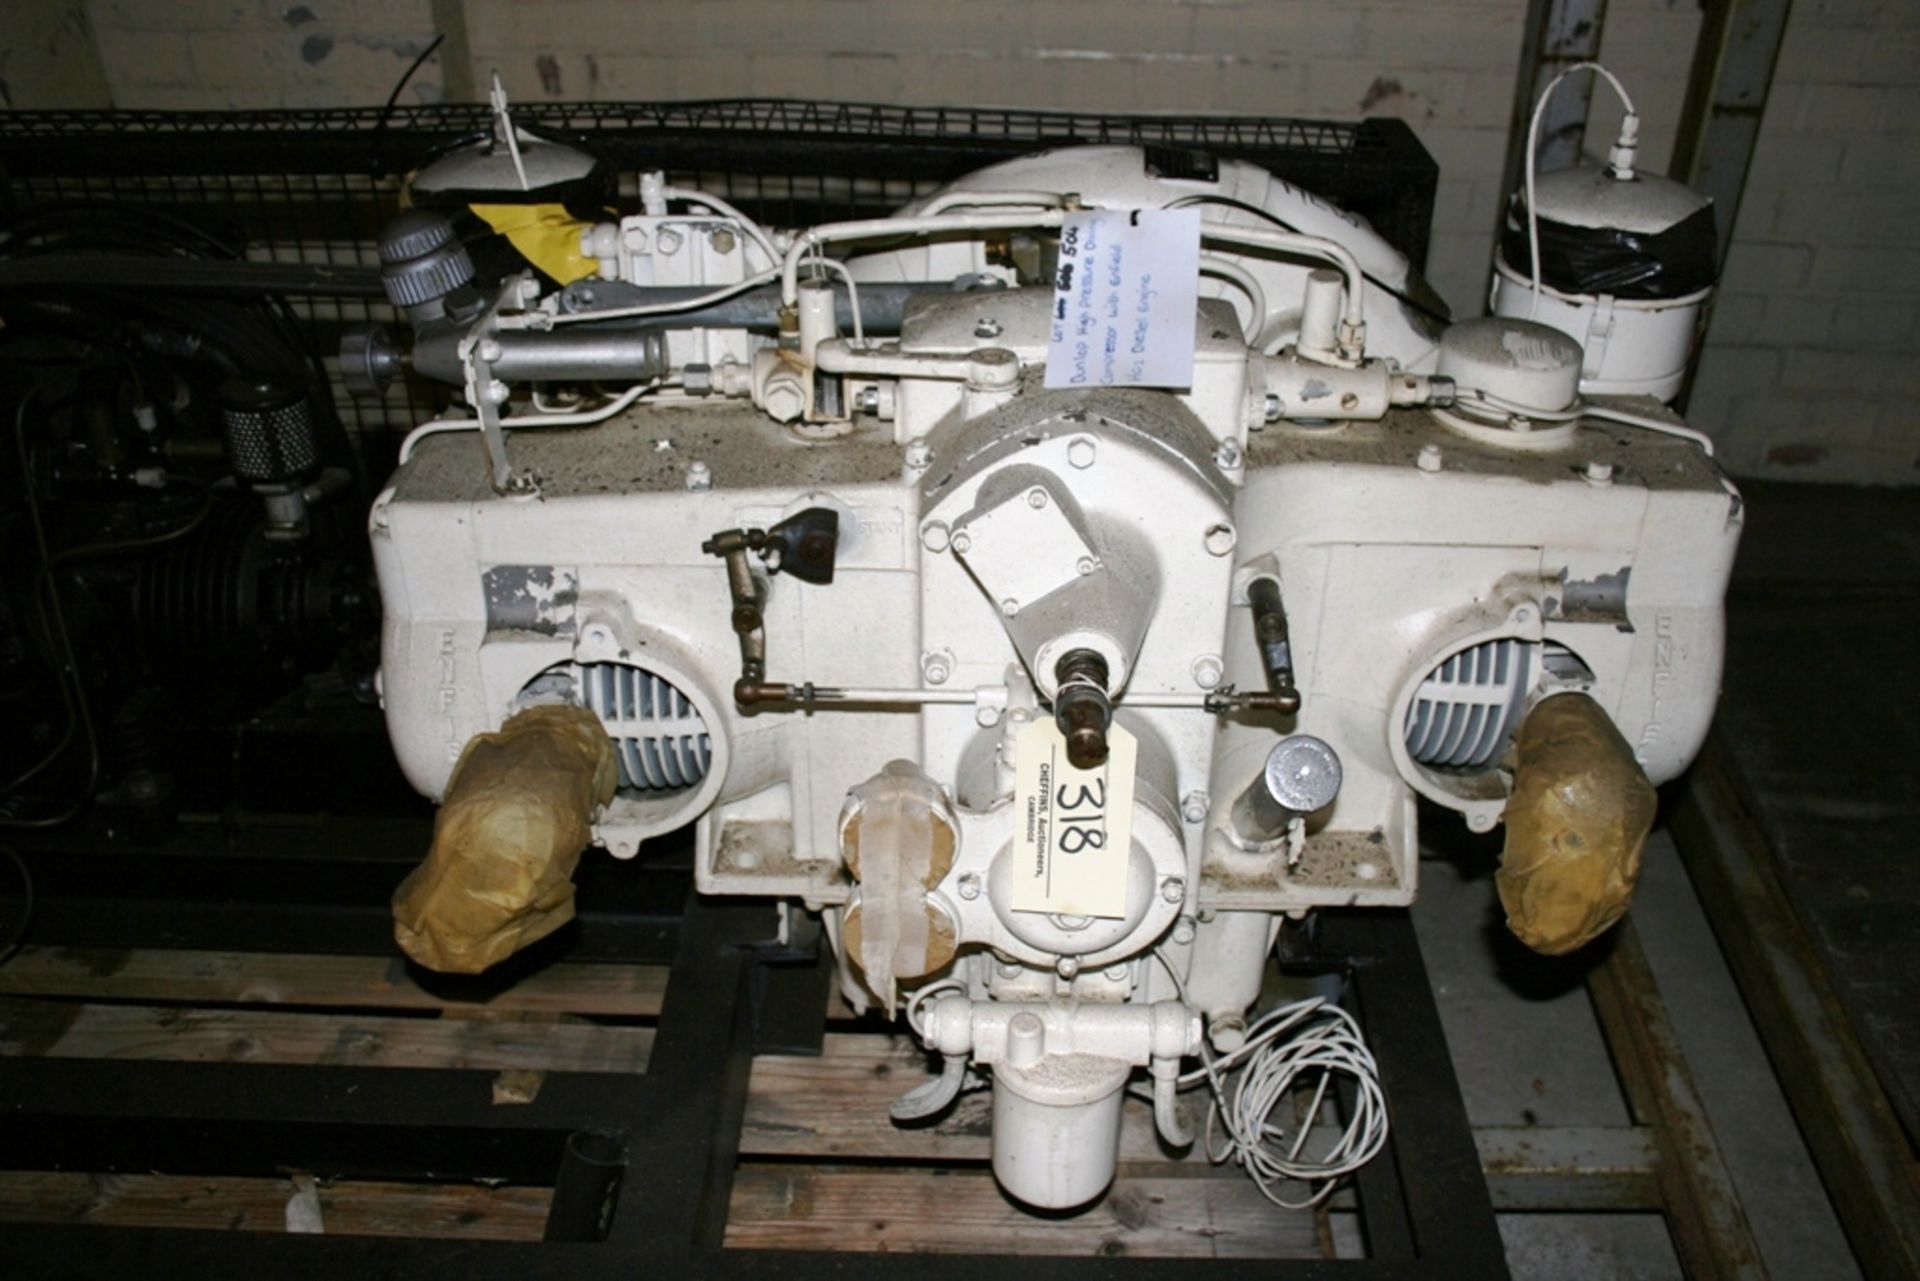 * Diesel Engine Enfield ho2 V twin compressor for diving use, Max working pressure1200PSI unused - Image 5 of 7